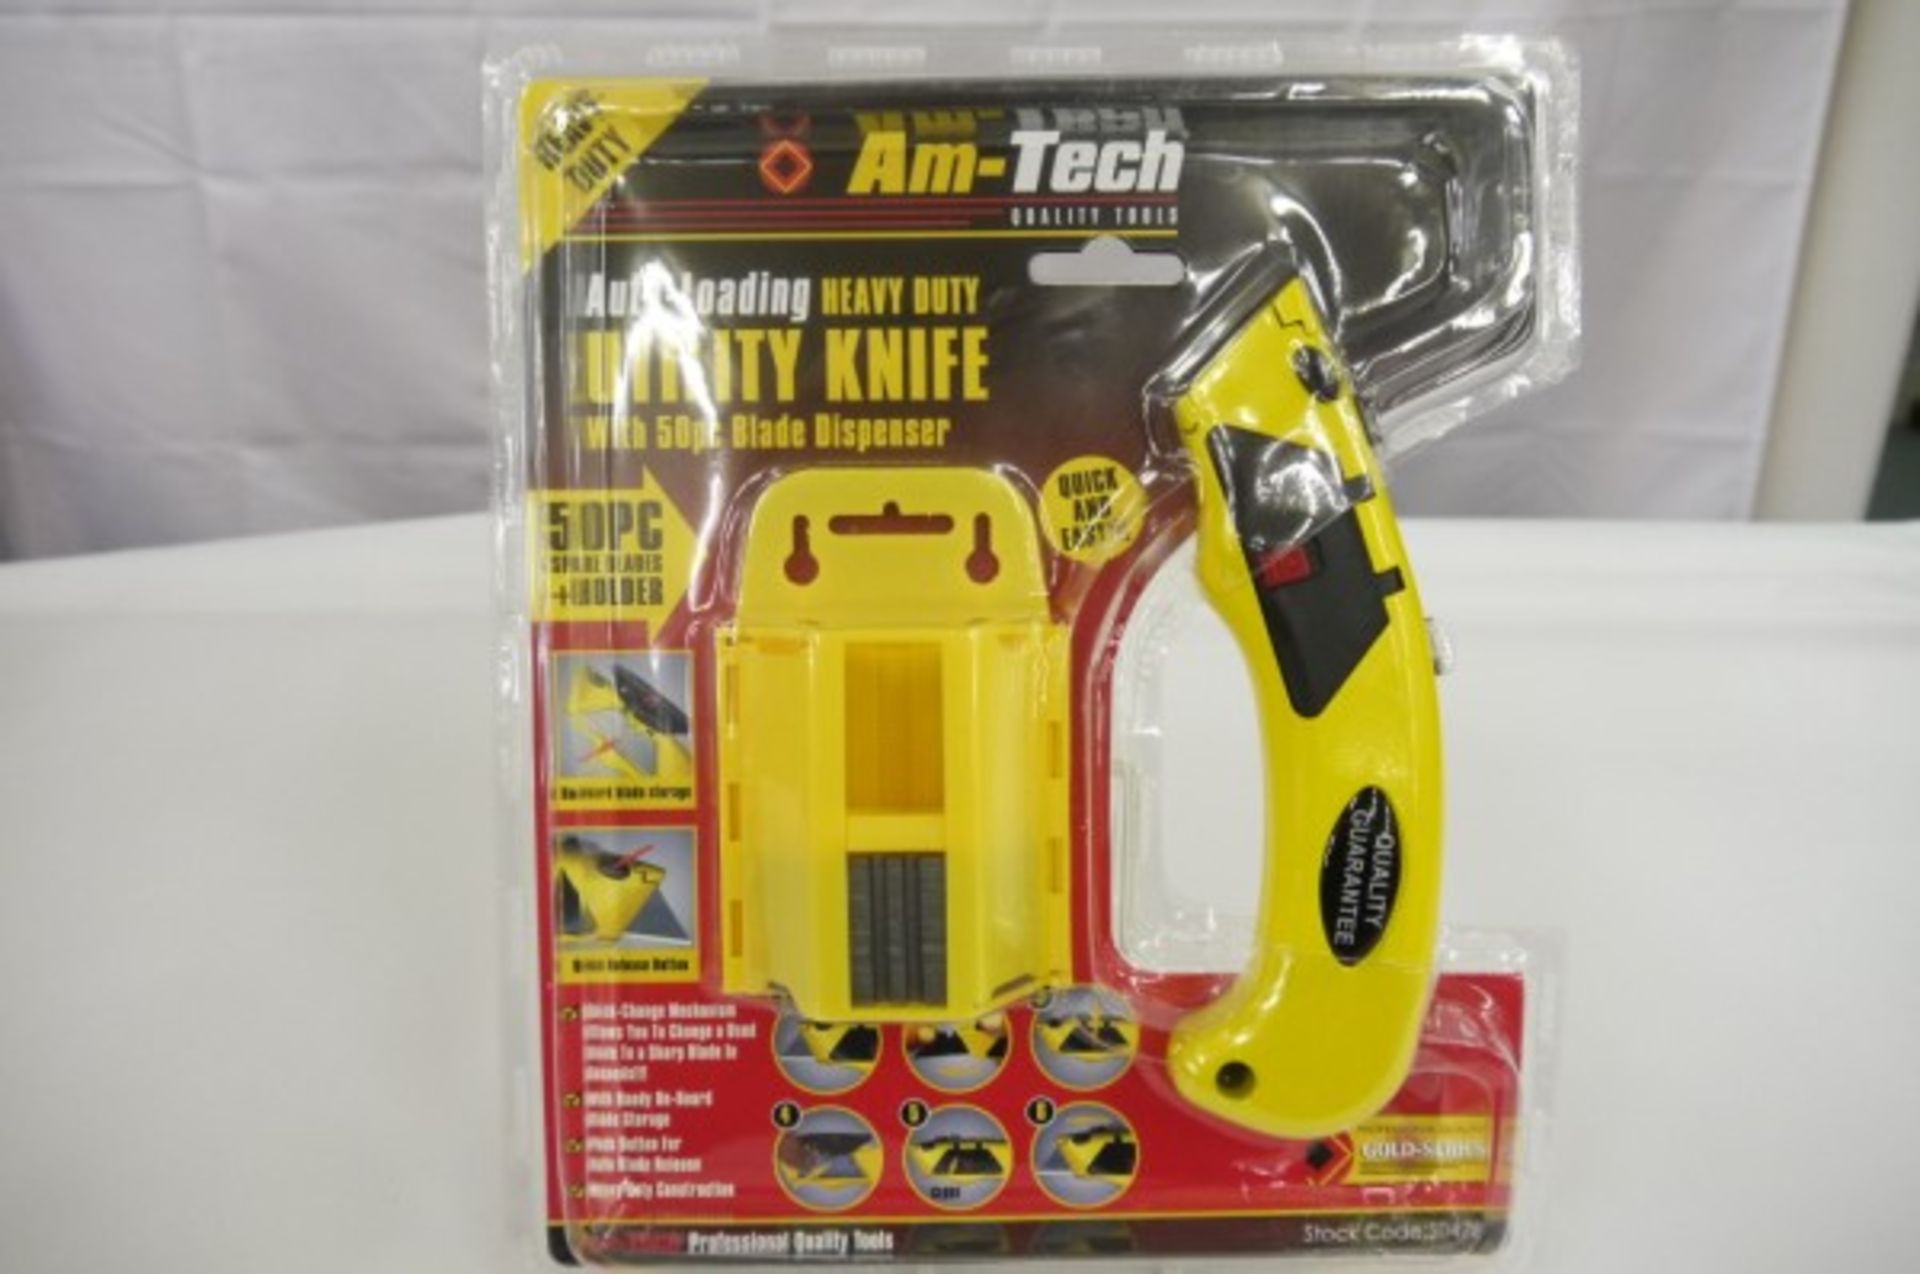 V *TRADE QTY* Brand New Auto Loading Utility With 50 Piece Blade Dispenser X 10 YOUR BID PRICE TO BE